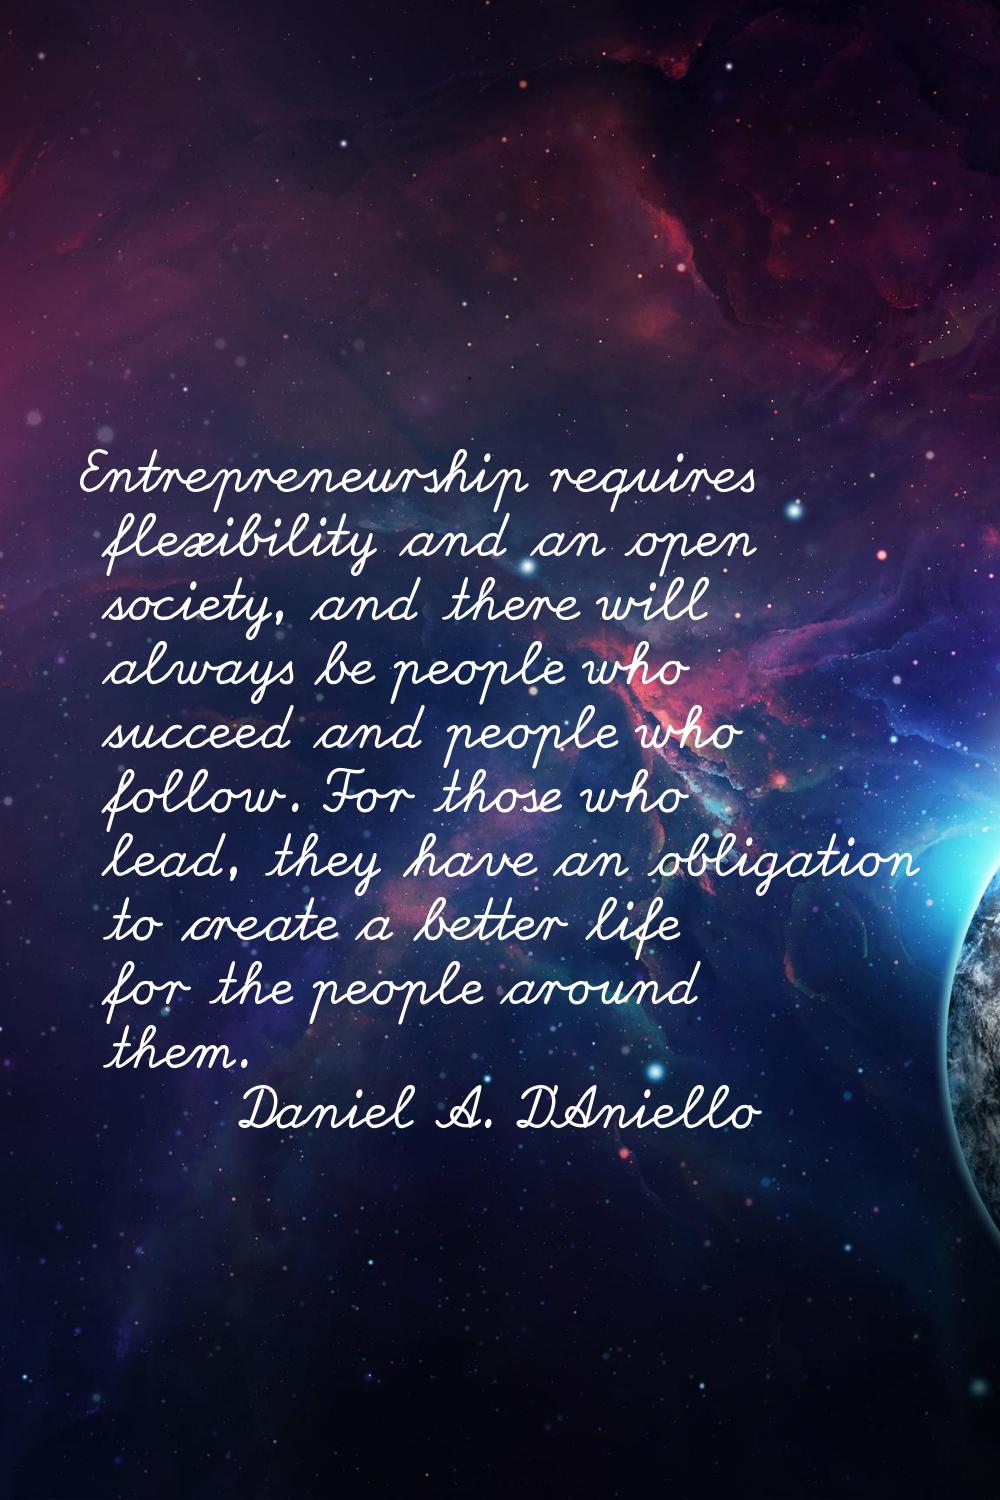 Entrepreneurship requires flexibility and an open society, and there will always be people who succ